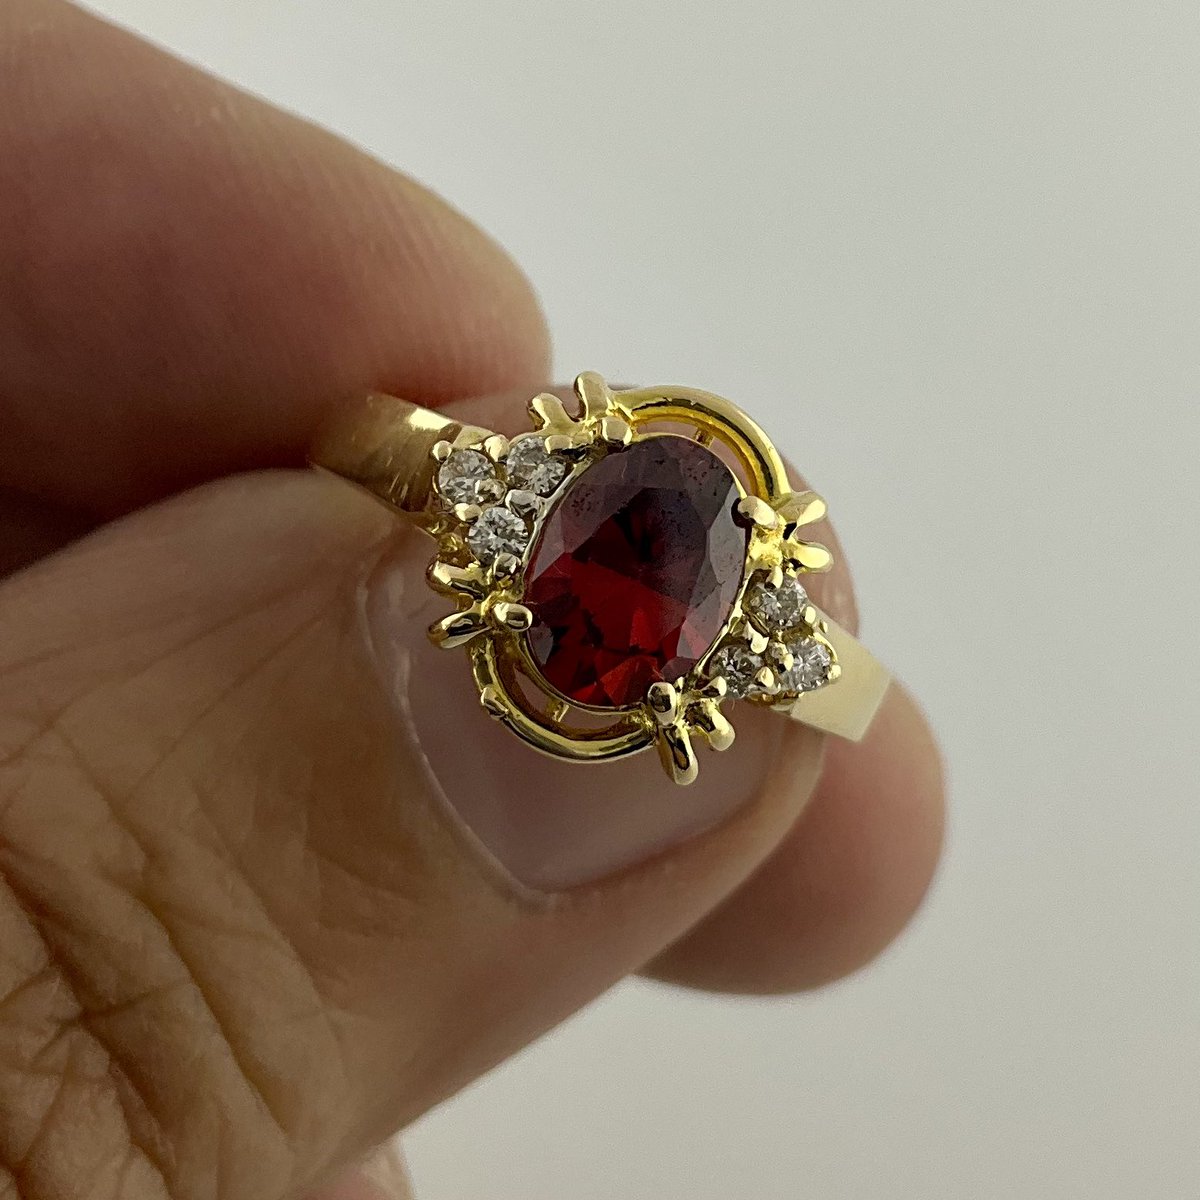 Available now! Ladies stone and diamond ring set in 3.8 grams of 18k gold! Features a red oval center stone and 6 diamonds for .06 ctw! Take it home for only $463 out the door!   #pawnshop #oakland #sanfrancisco #bestcollateral #gold #redstone #diamonds #stonering #mothersday